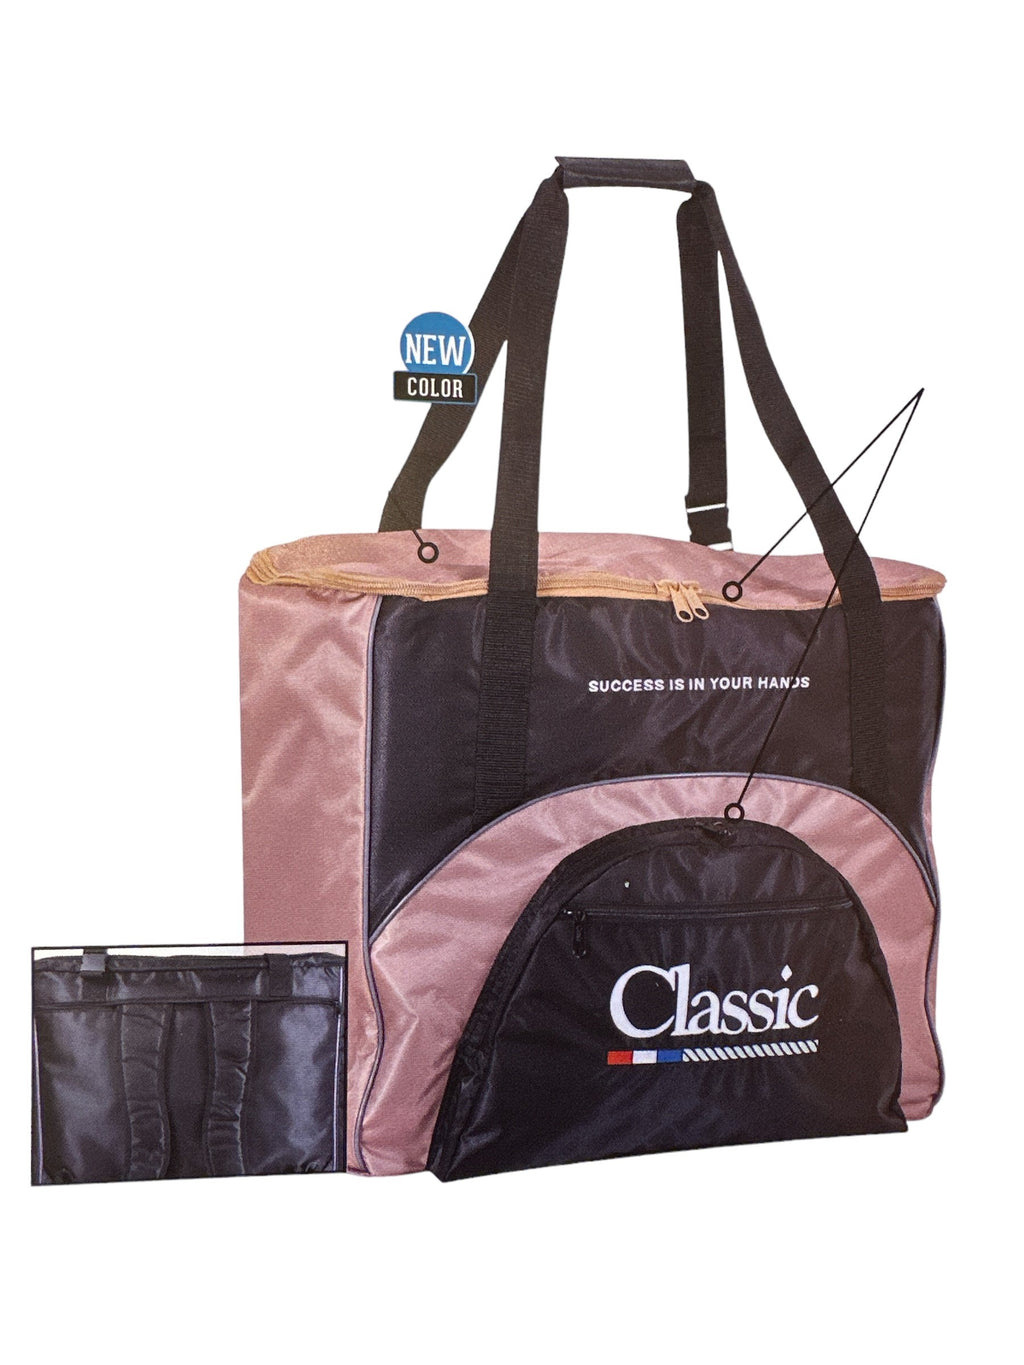 Classic Ropes Professional Rope Bag- Black/Wheat